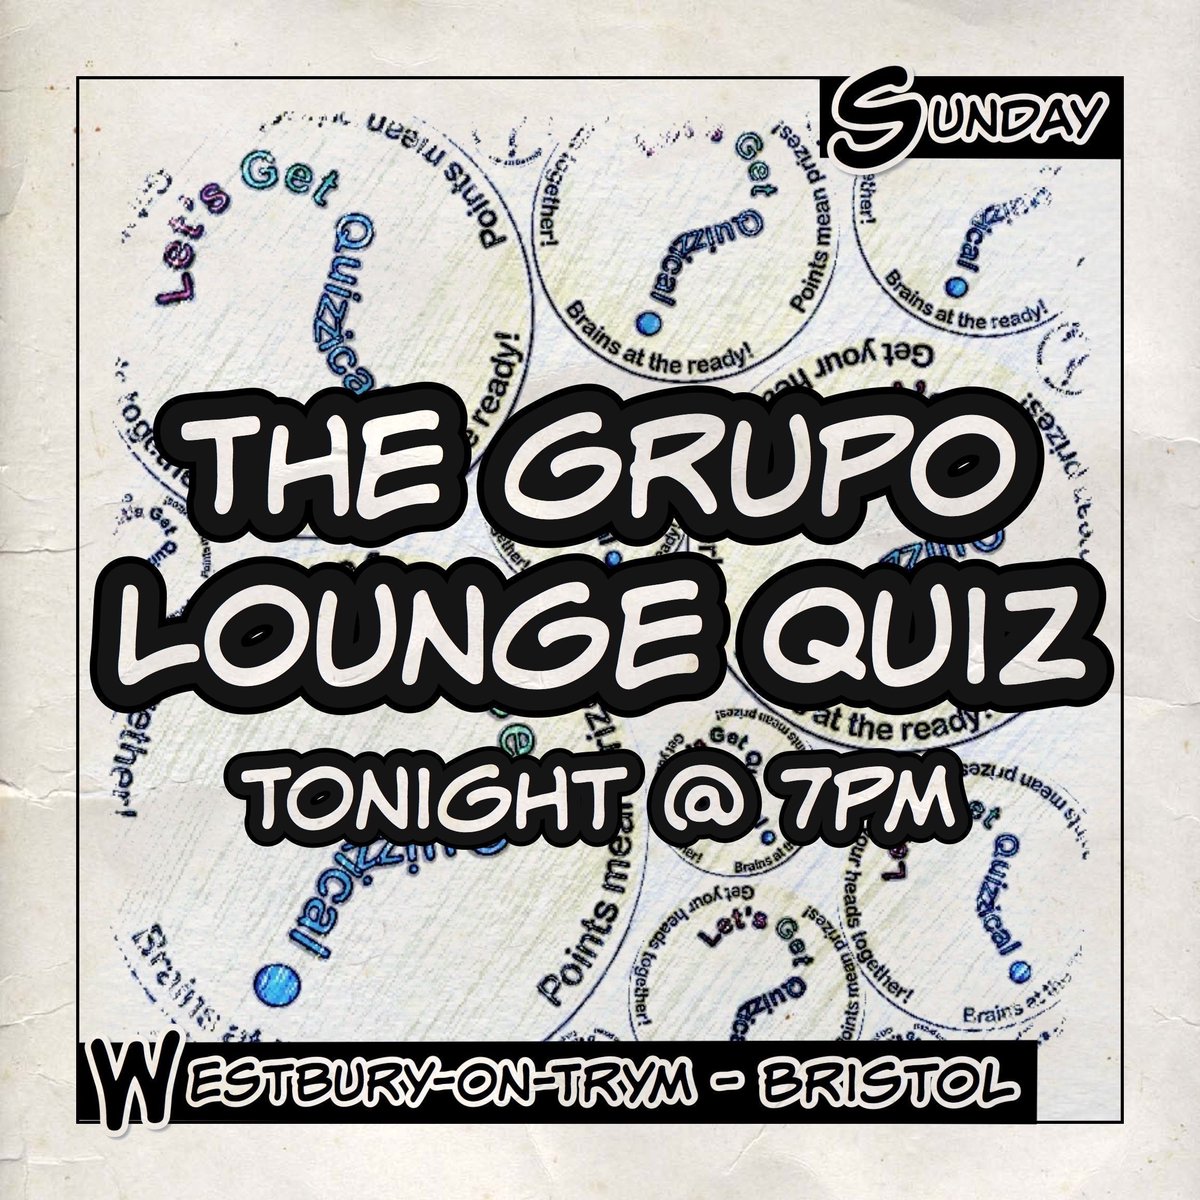 It’s #QuizNight at #TheGrupoLounge in #BS9, #WestburyOnTrym, #Bristol. 7pm start for our #GeneralKnowledge #Quiz with cash and vouchers to be won